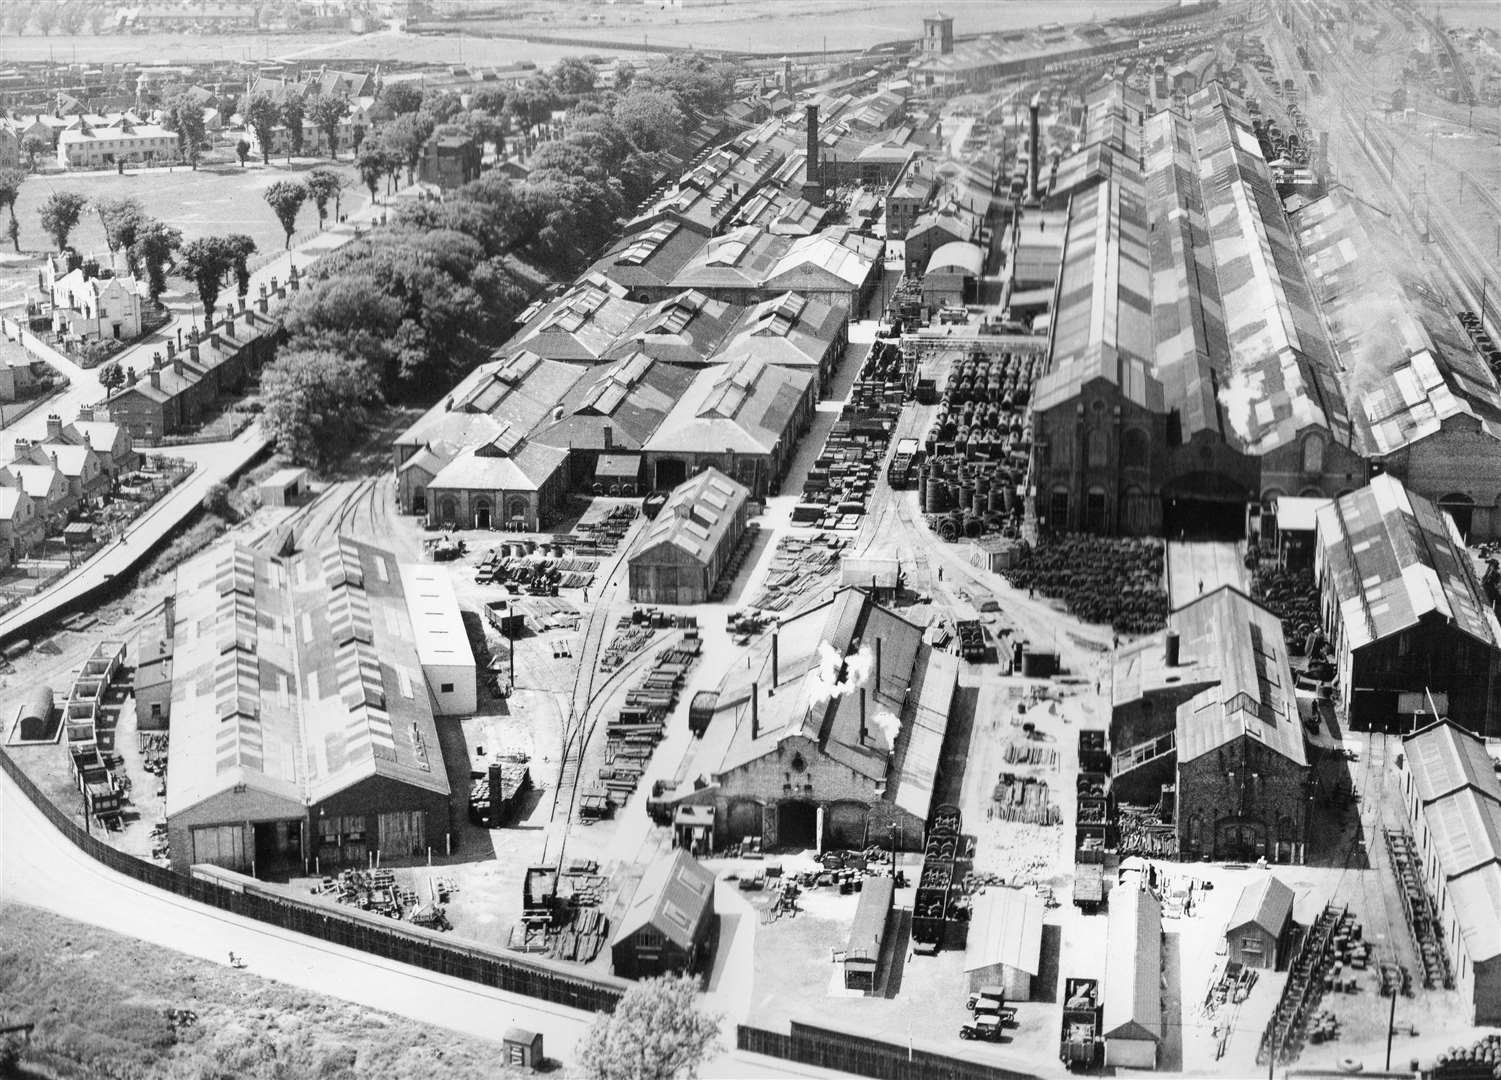 Ashford Railway Works pictured from the air in the 1940s - the traditional economic backbone of the town. Picture: Steve Salter Archive